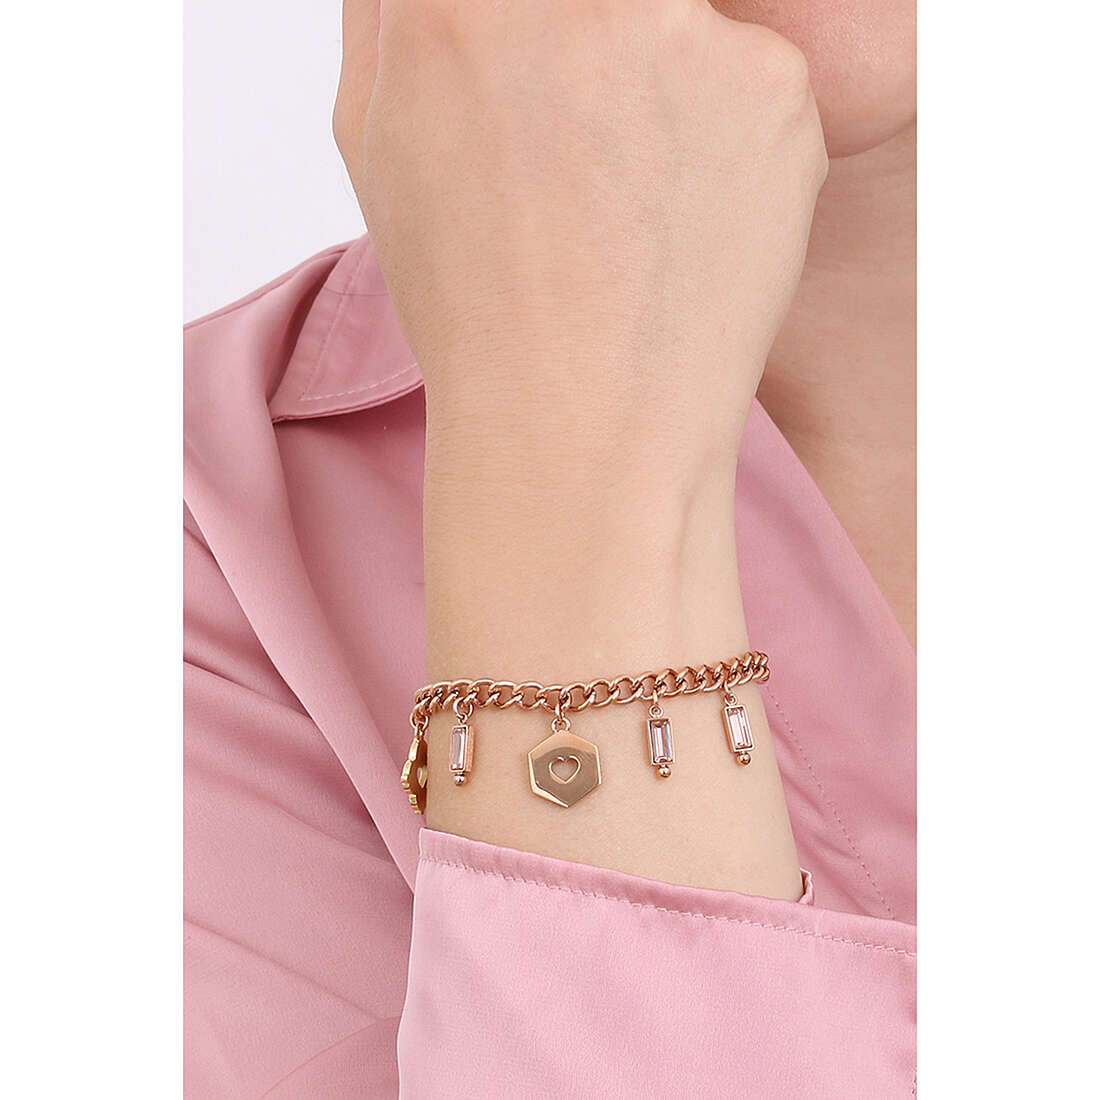 Ops Objects bracciali Treasure donna OPSBR-728 indosso